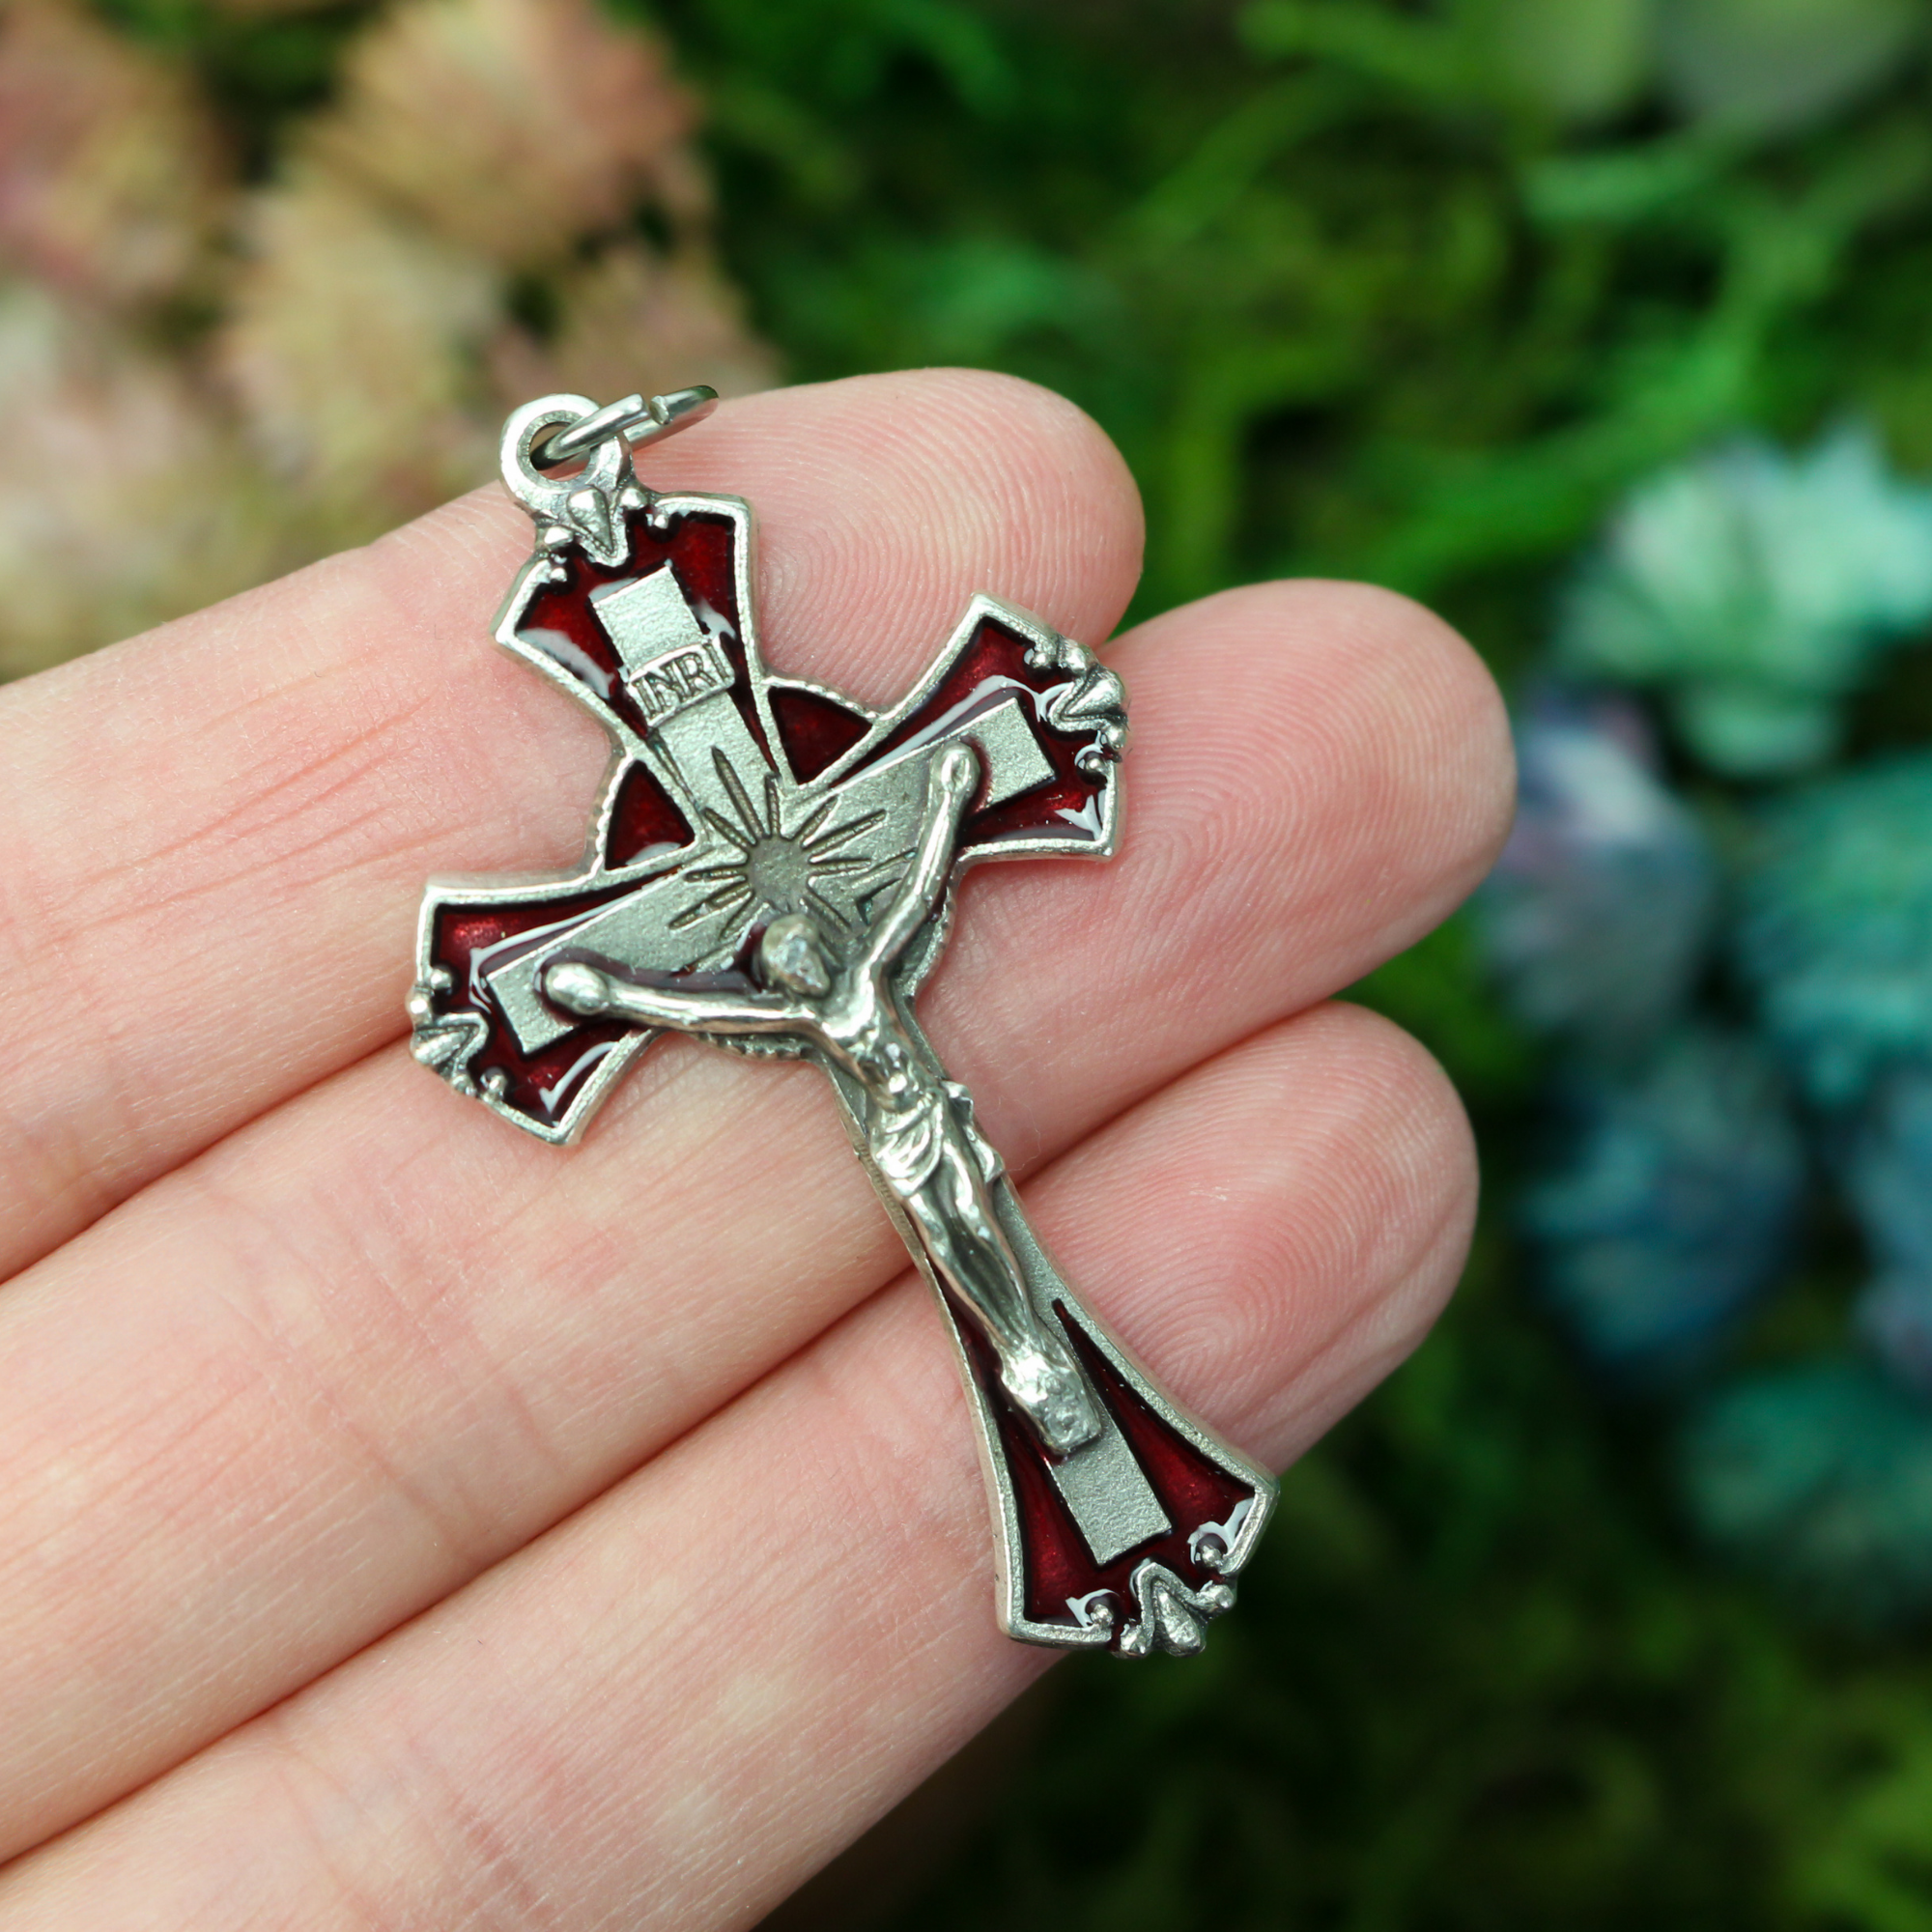 Red Enamel Crucifix Cross with Flared Edges 1-7/8" Long